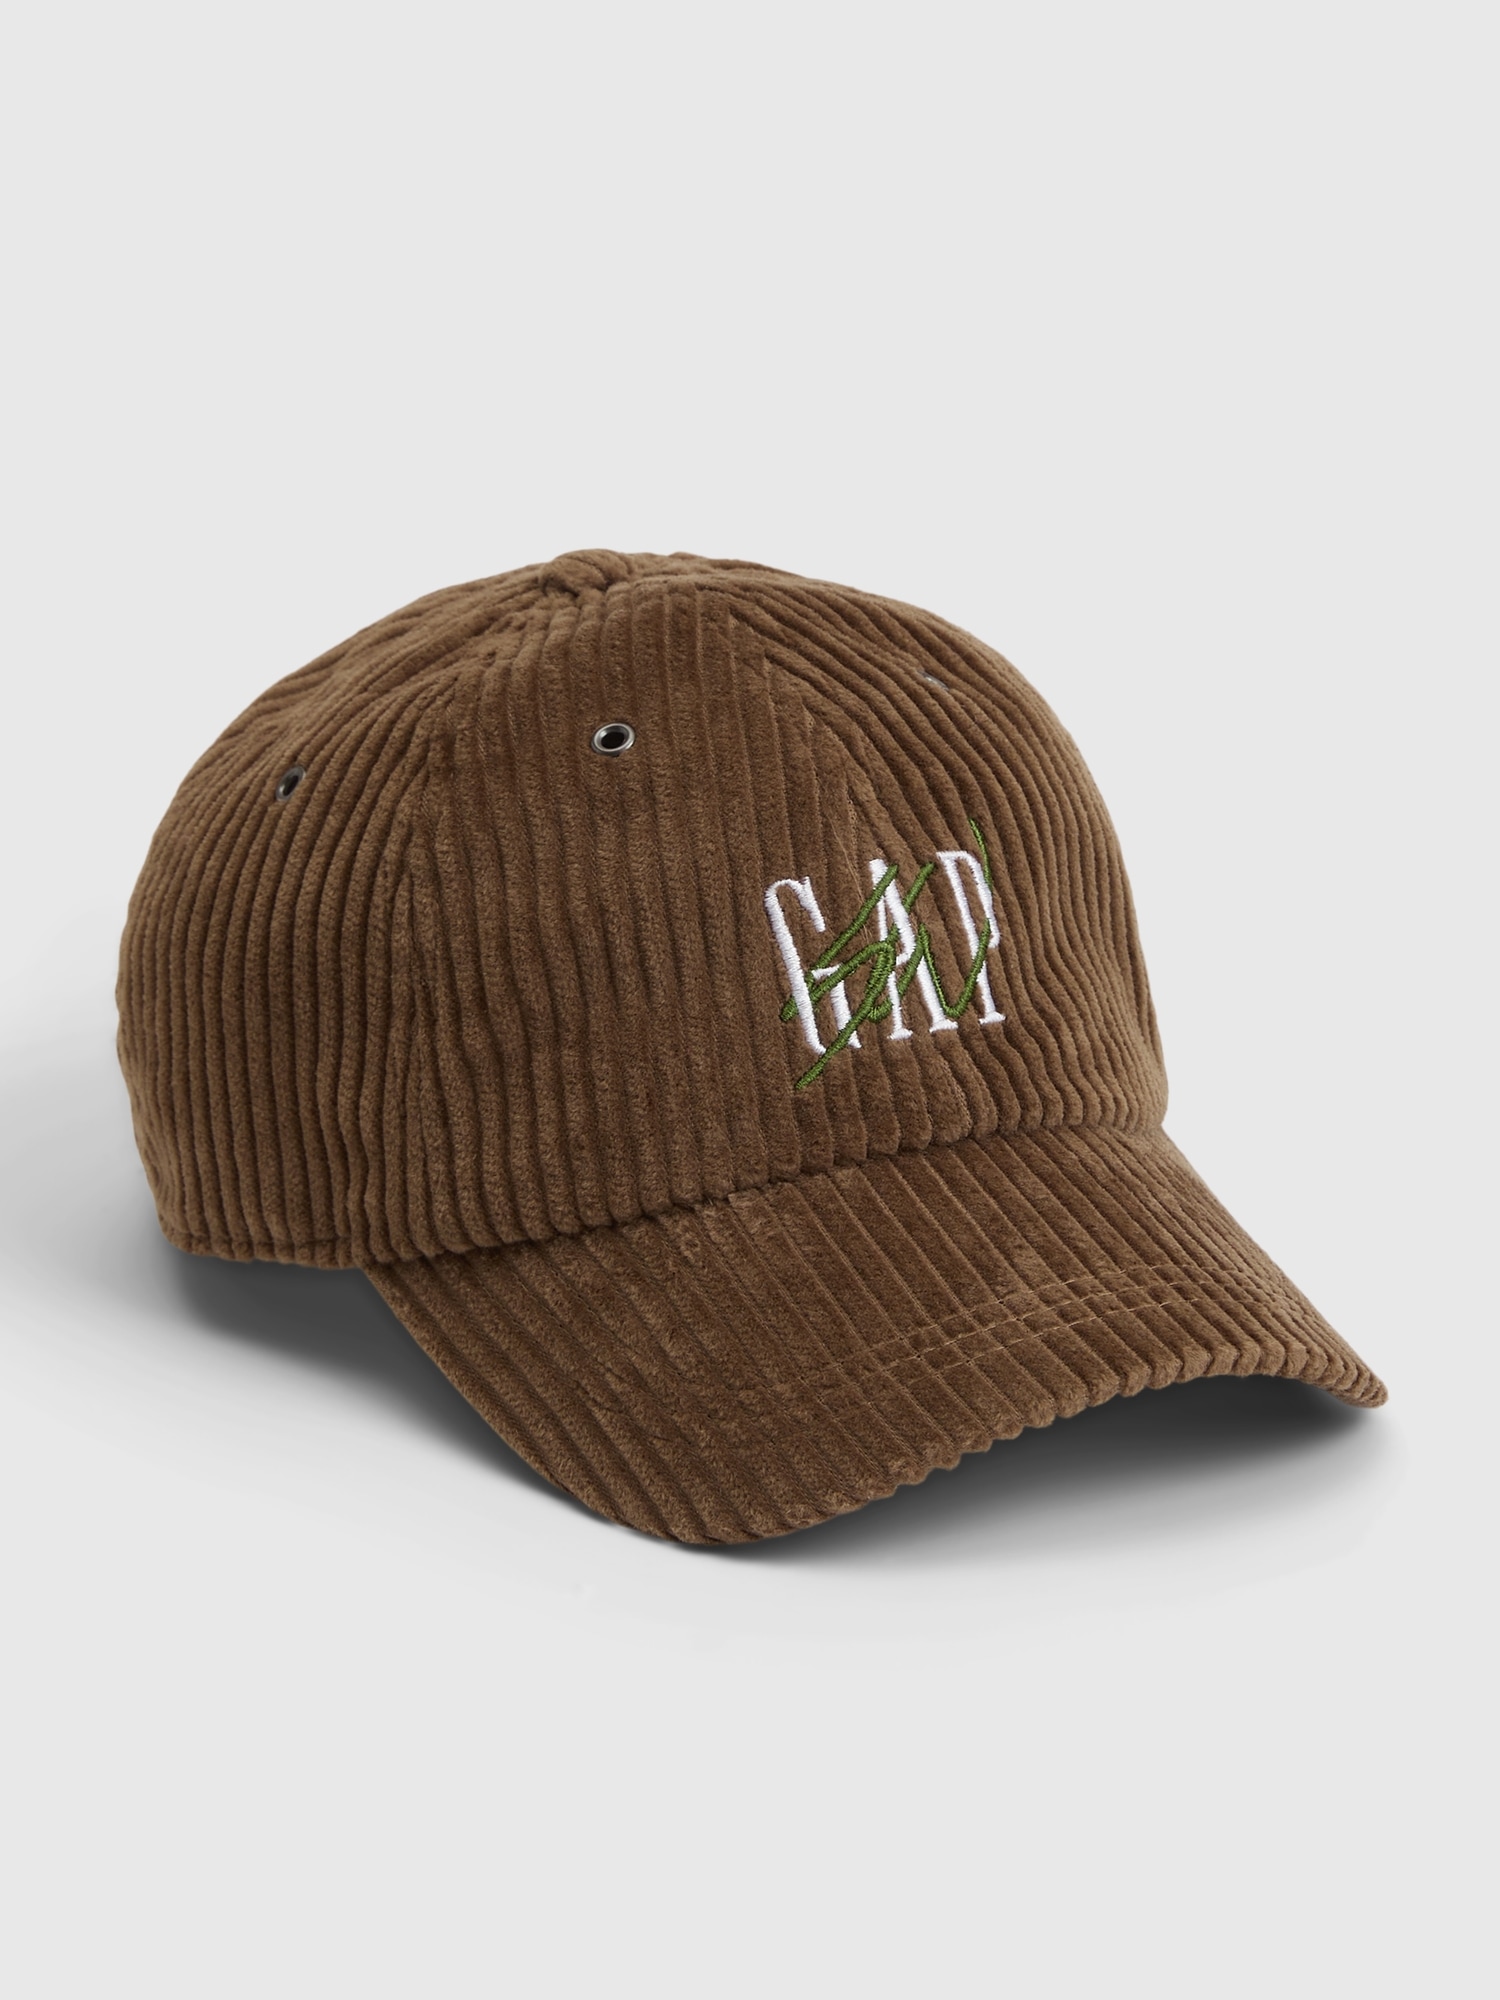 Gap Re-Issue × Sean Wotherspoon Corduroy Logo Baseball Hat